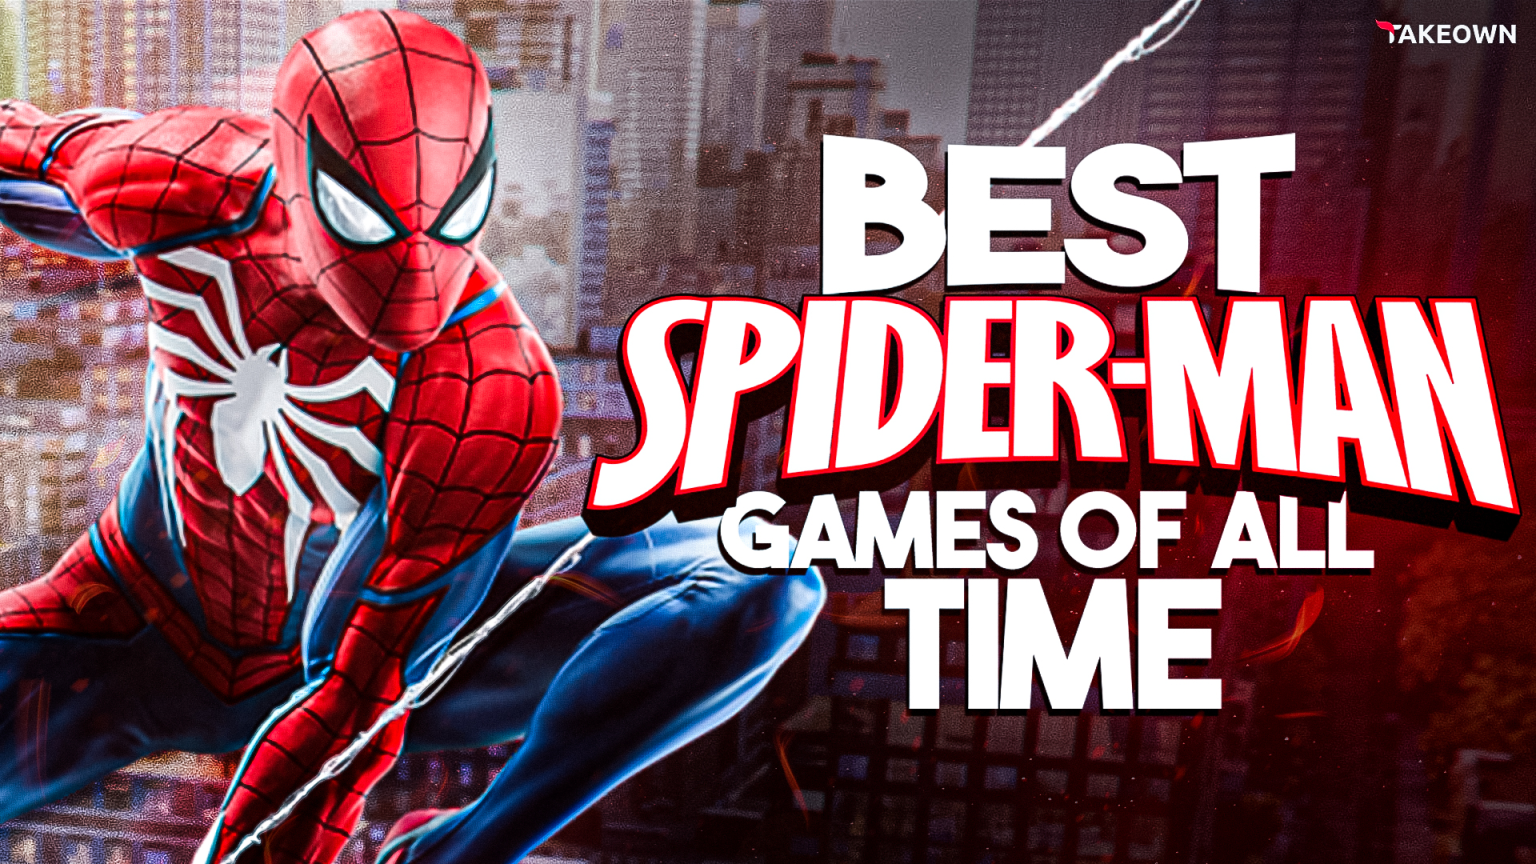 Top 5 Best Spider-Man Video Games Of All Time